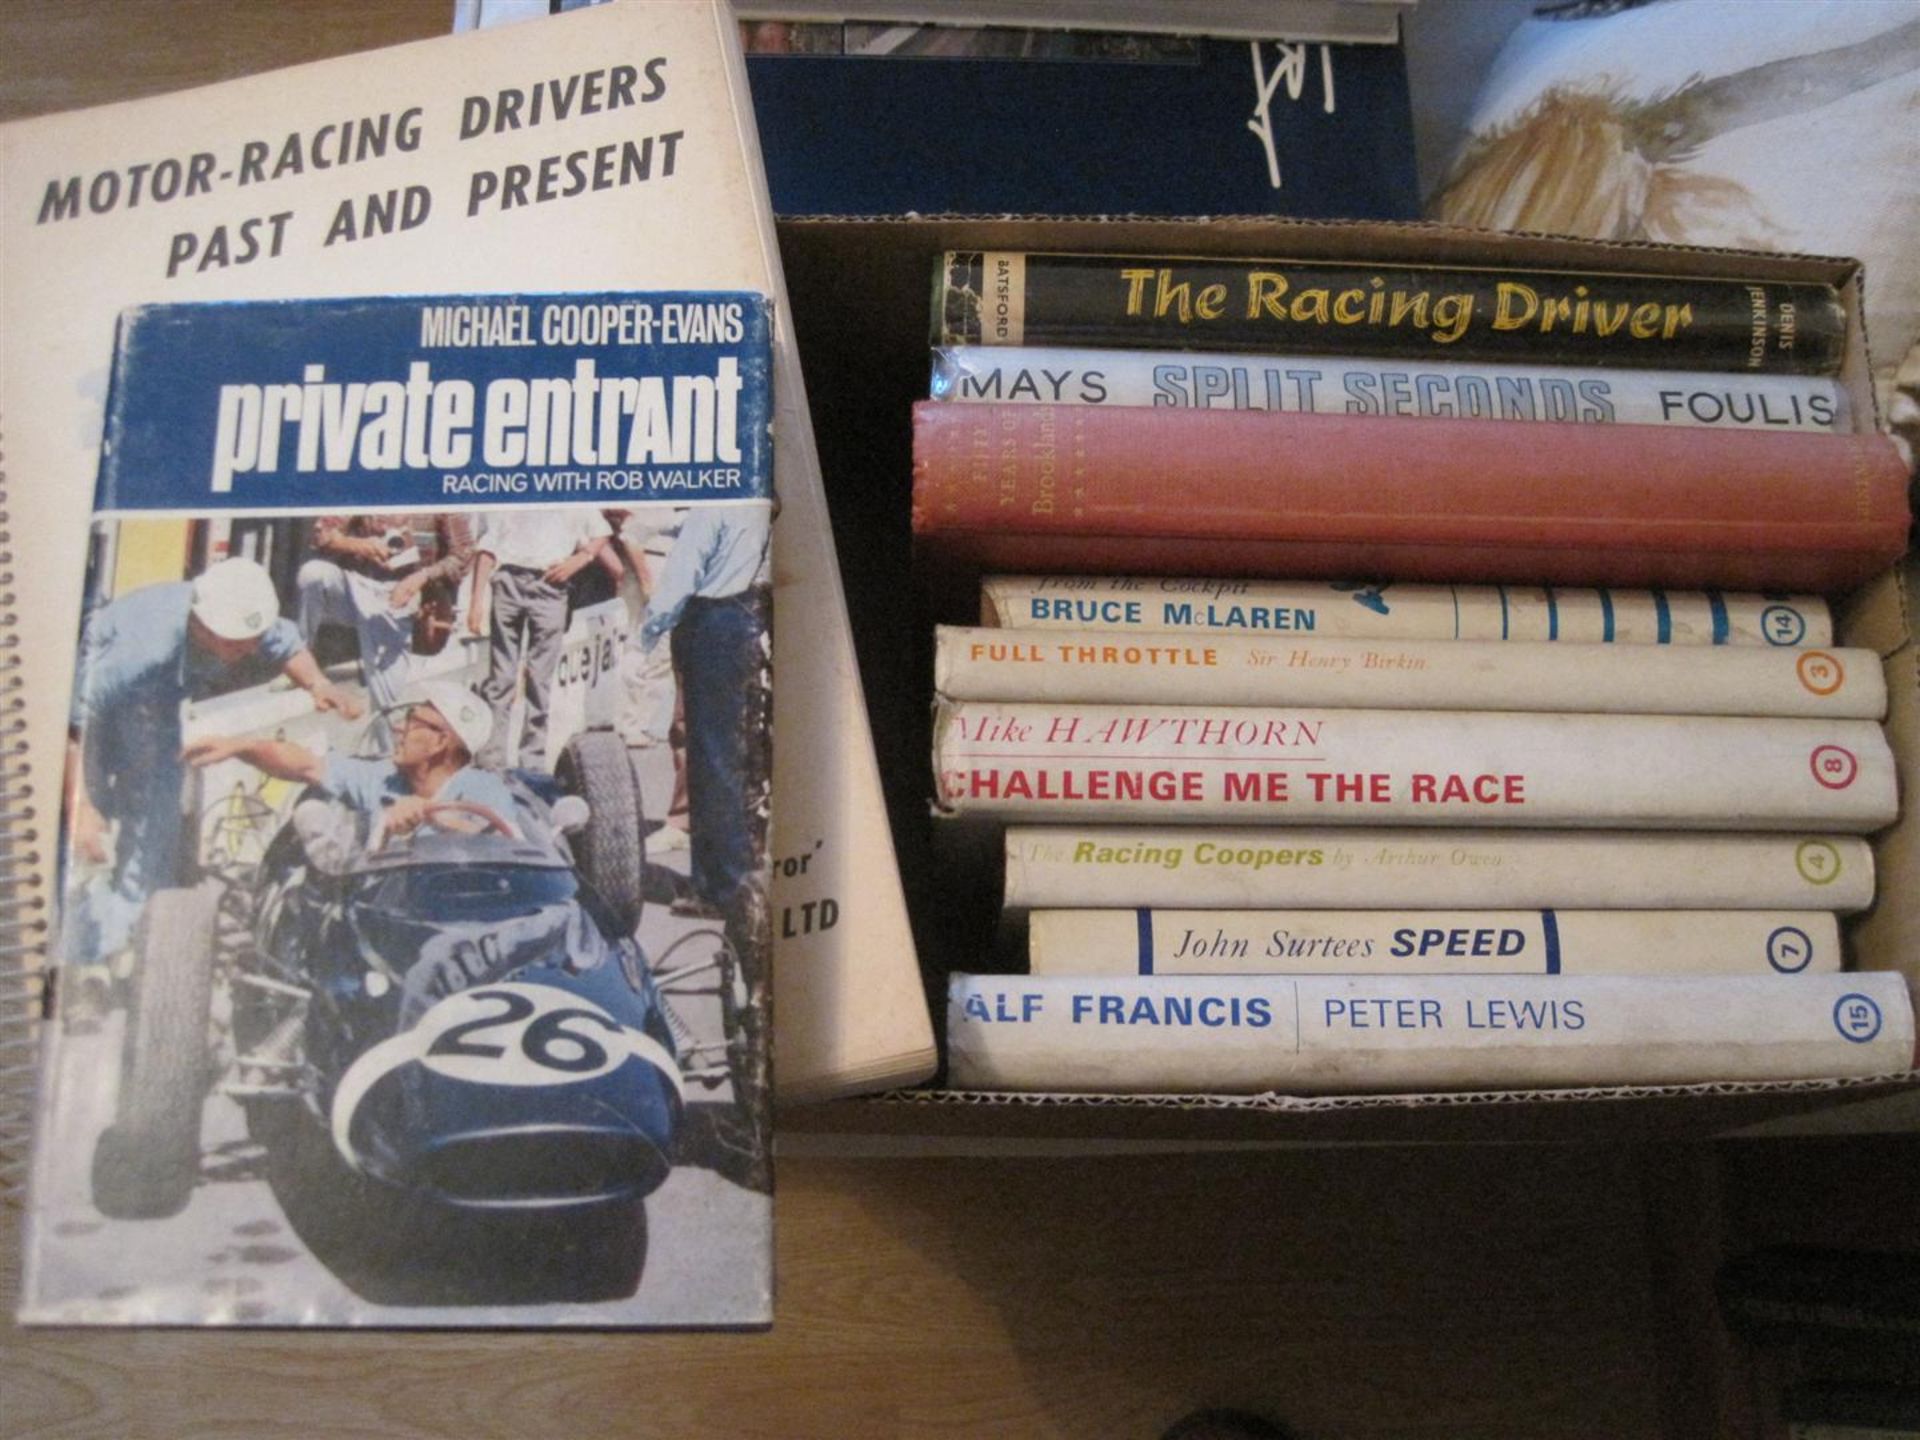 Motor Racing Drivers Past & Present, Full Throttle by Birkin, Challenge Me The Race by Hawthorne,